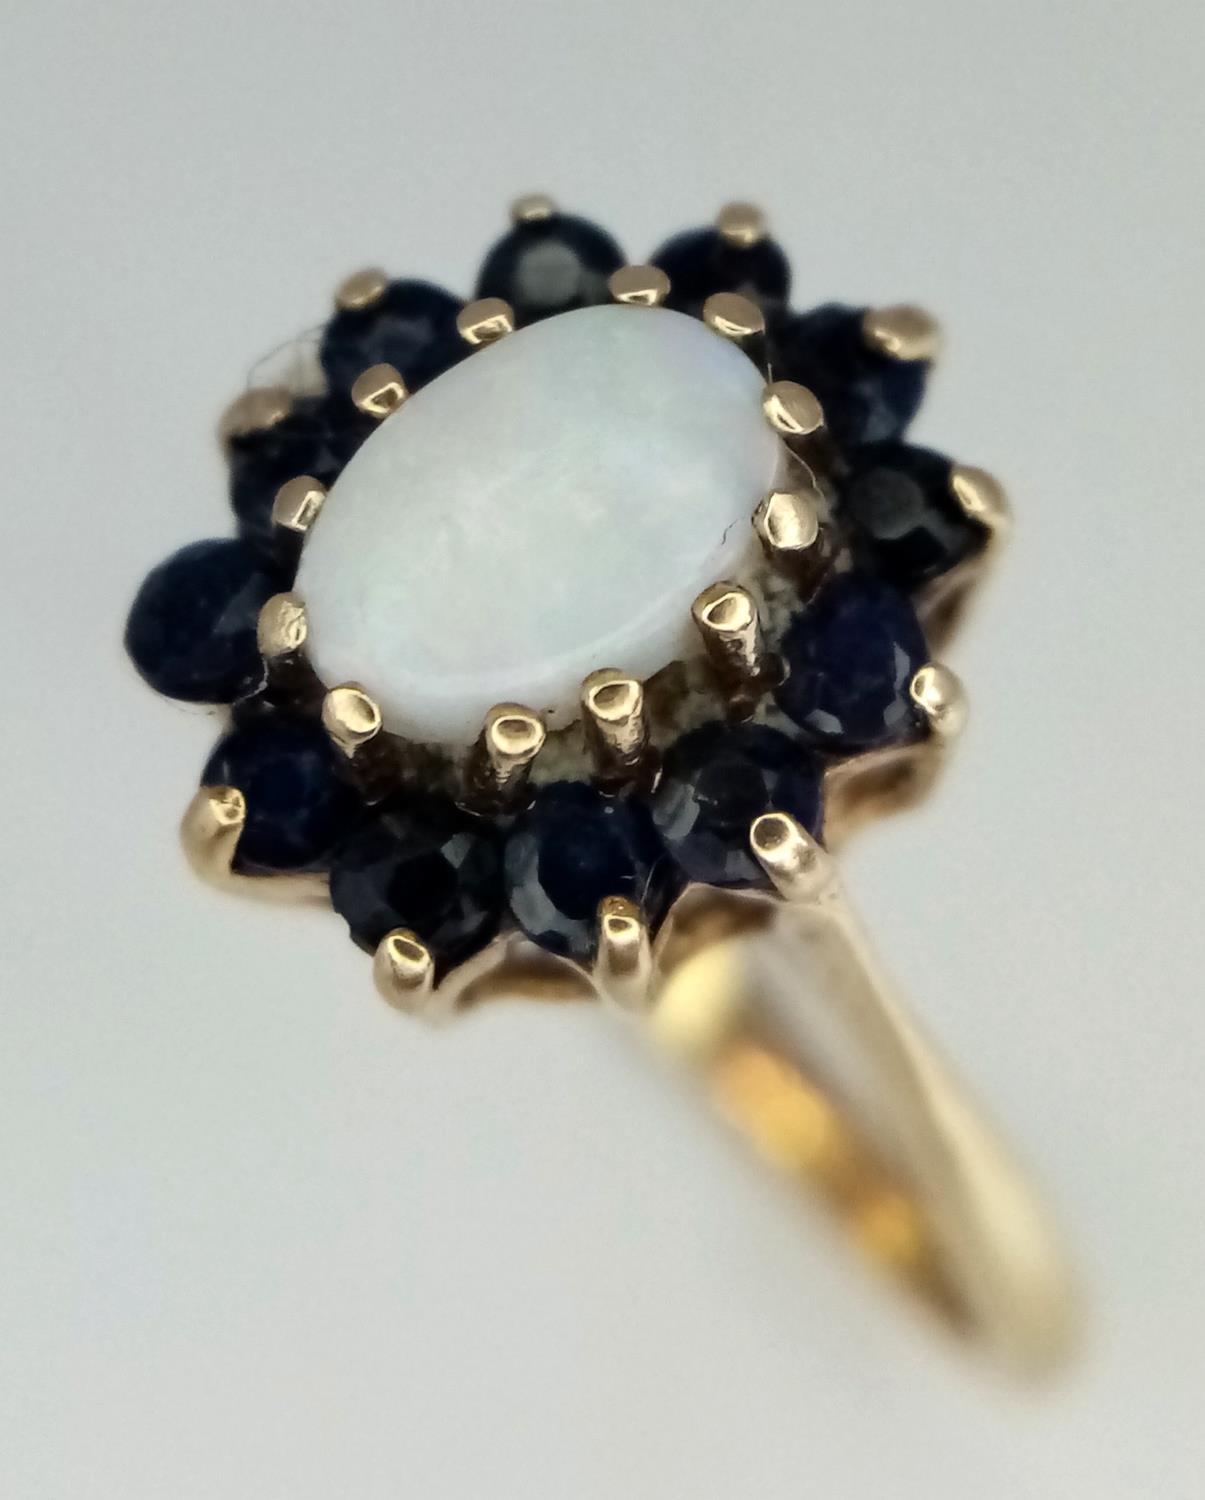 A 9K YELLOW GOLD SAPPHIRE & OPAL CLUSTER RING 2G SIZE L 1/2. SC 9075 - Image 3 of 5